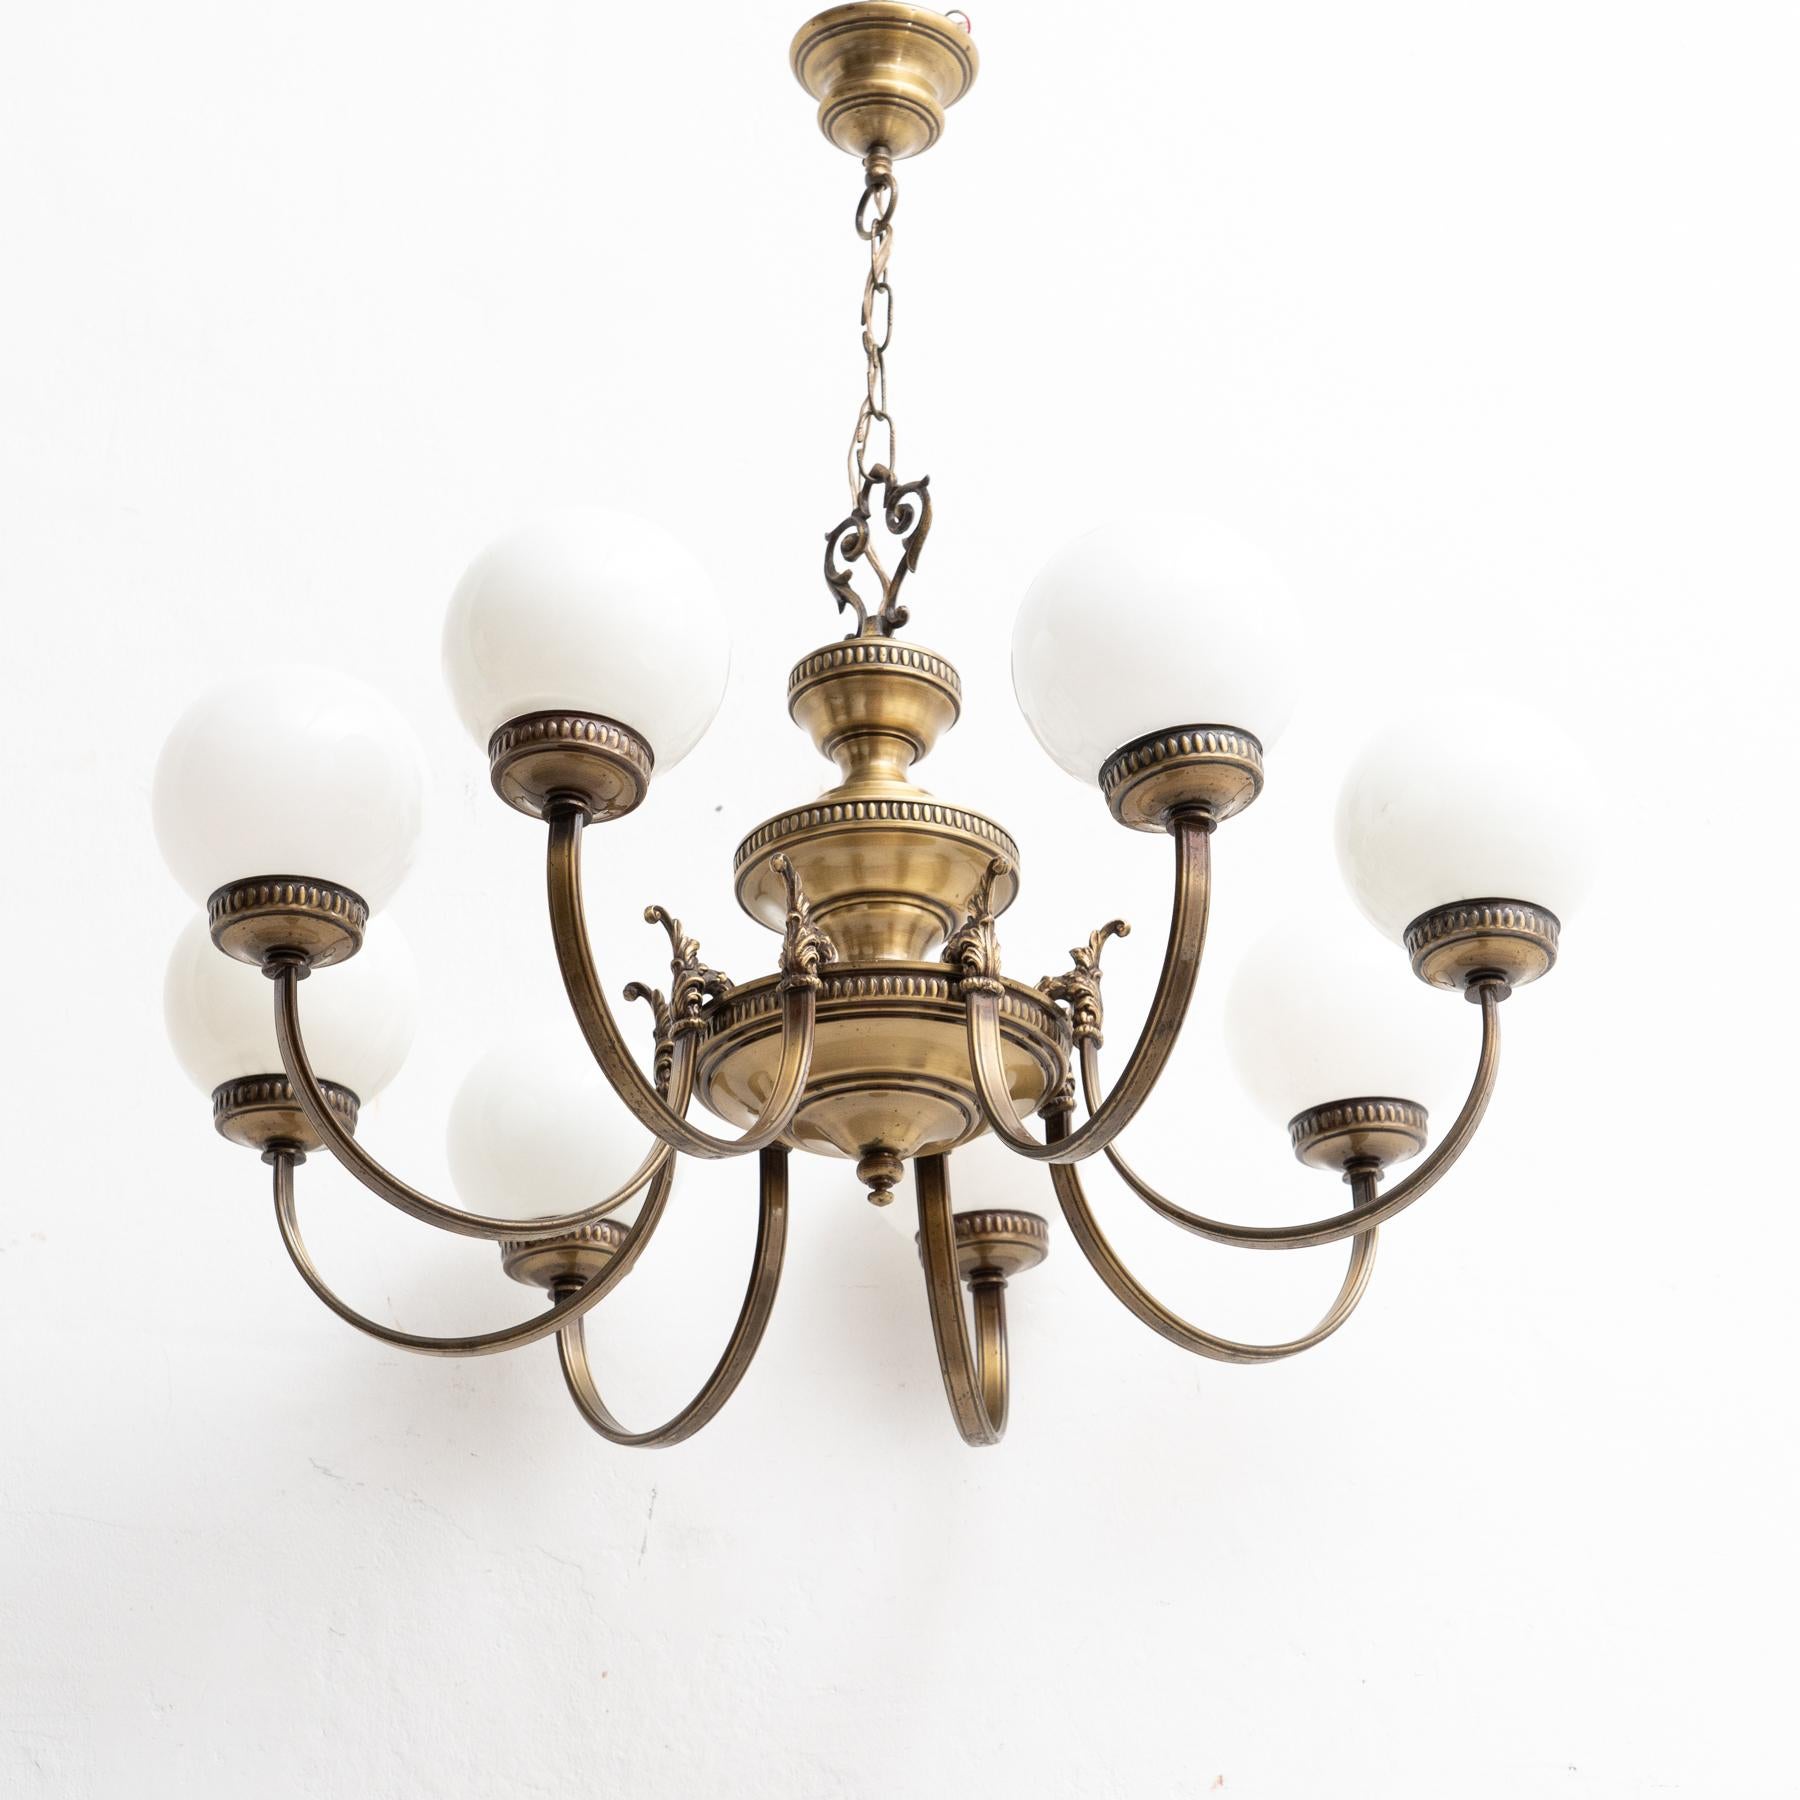 Mid-20th Century Vintage French Brass and Glass Ceiling Lamp circa 1950 For Sale